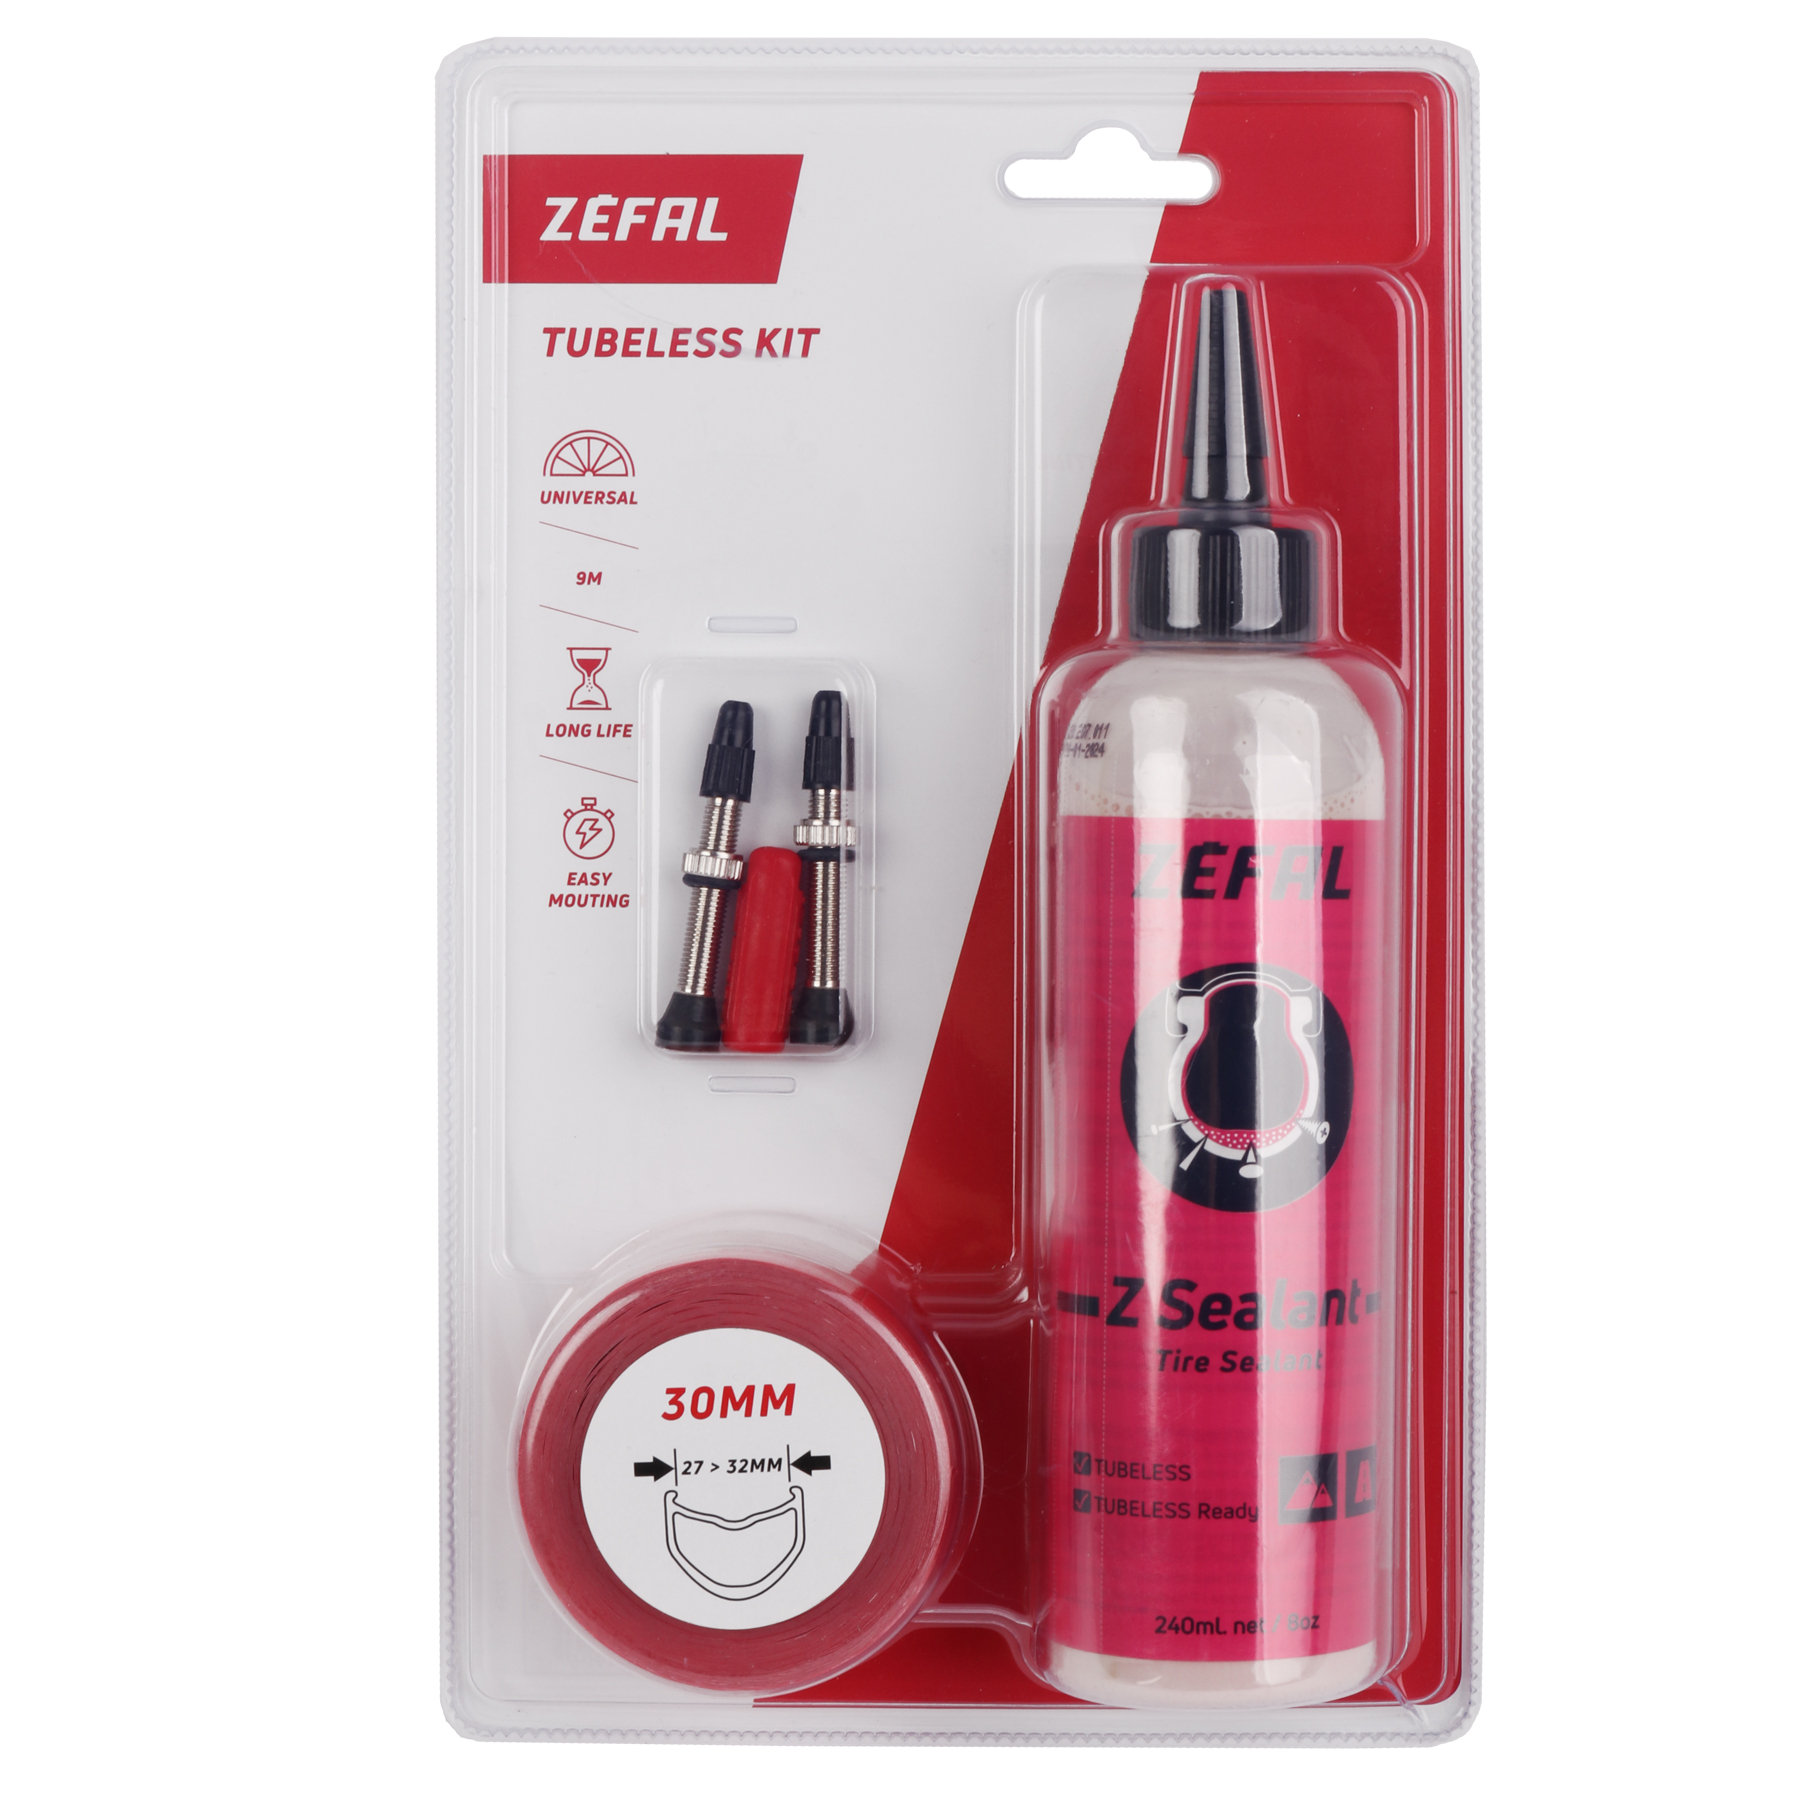 Picture of Zéfal Tubeless Kit 30mm / 9m